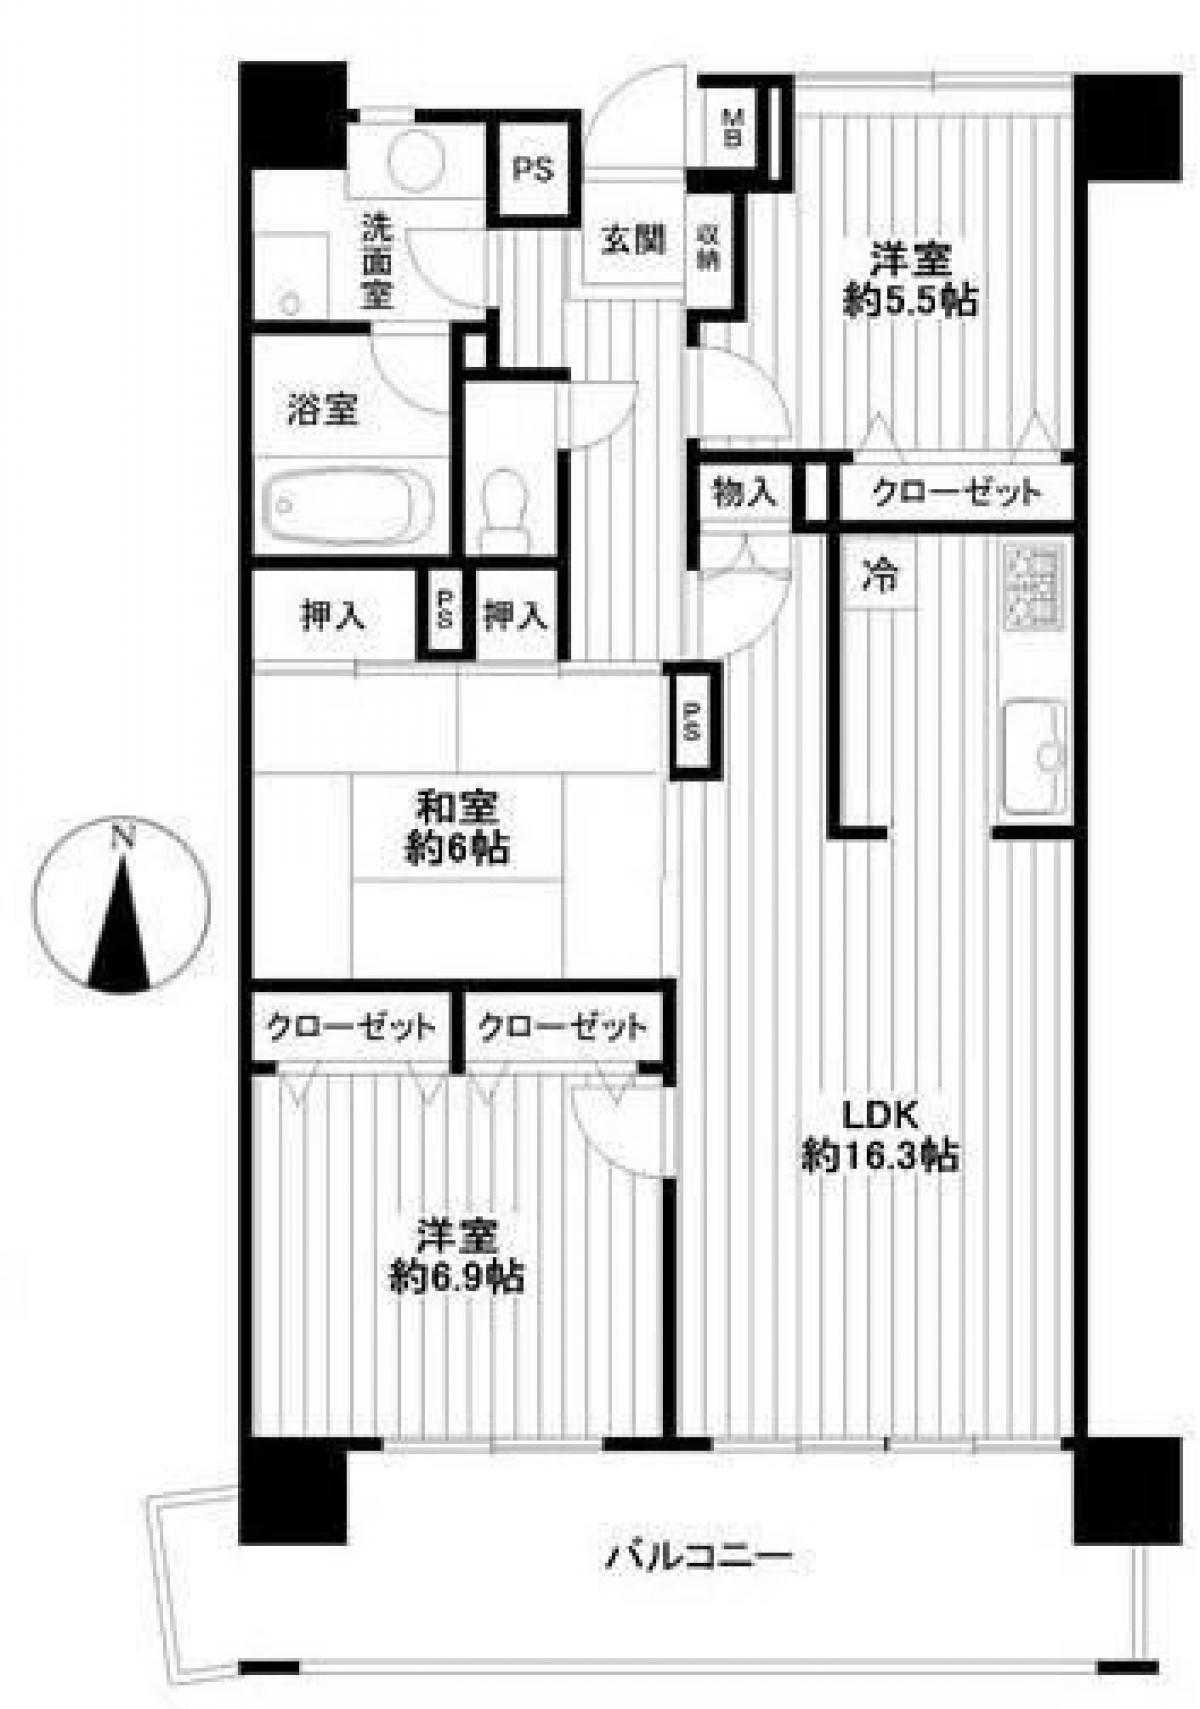 Picture of Apartment For Sale in Toride Shi, Ibaraki, Japan